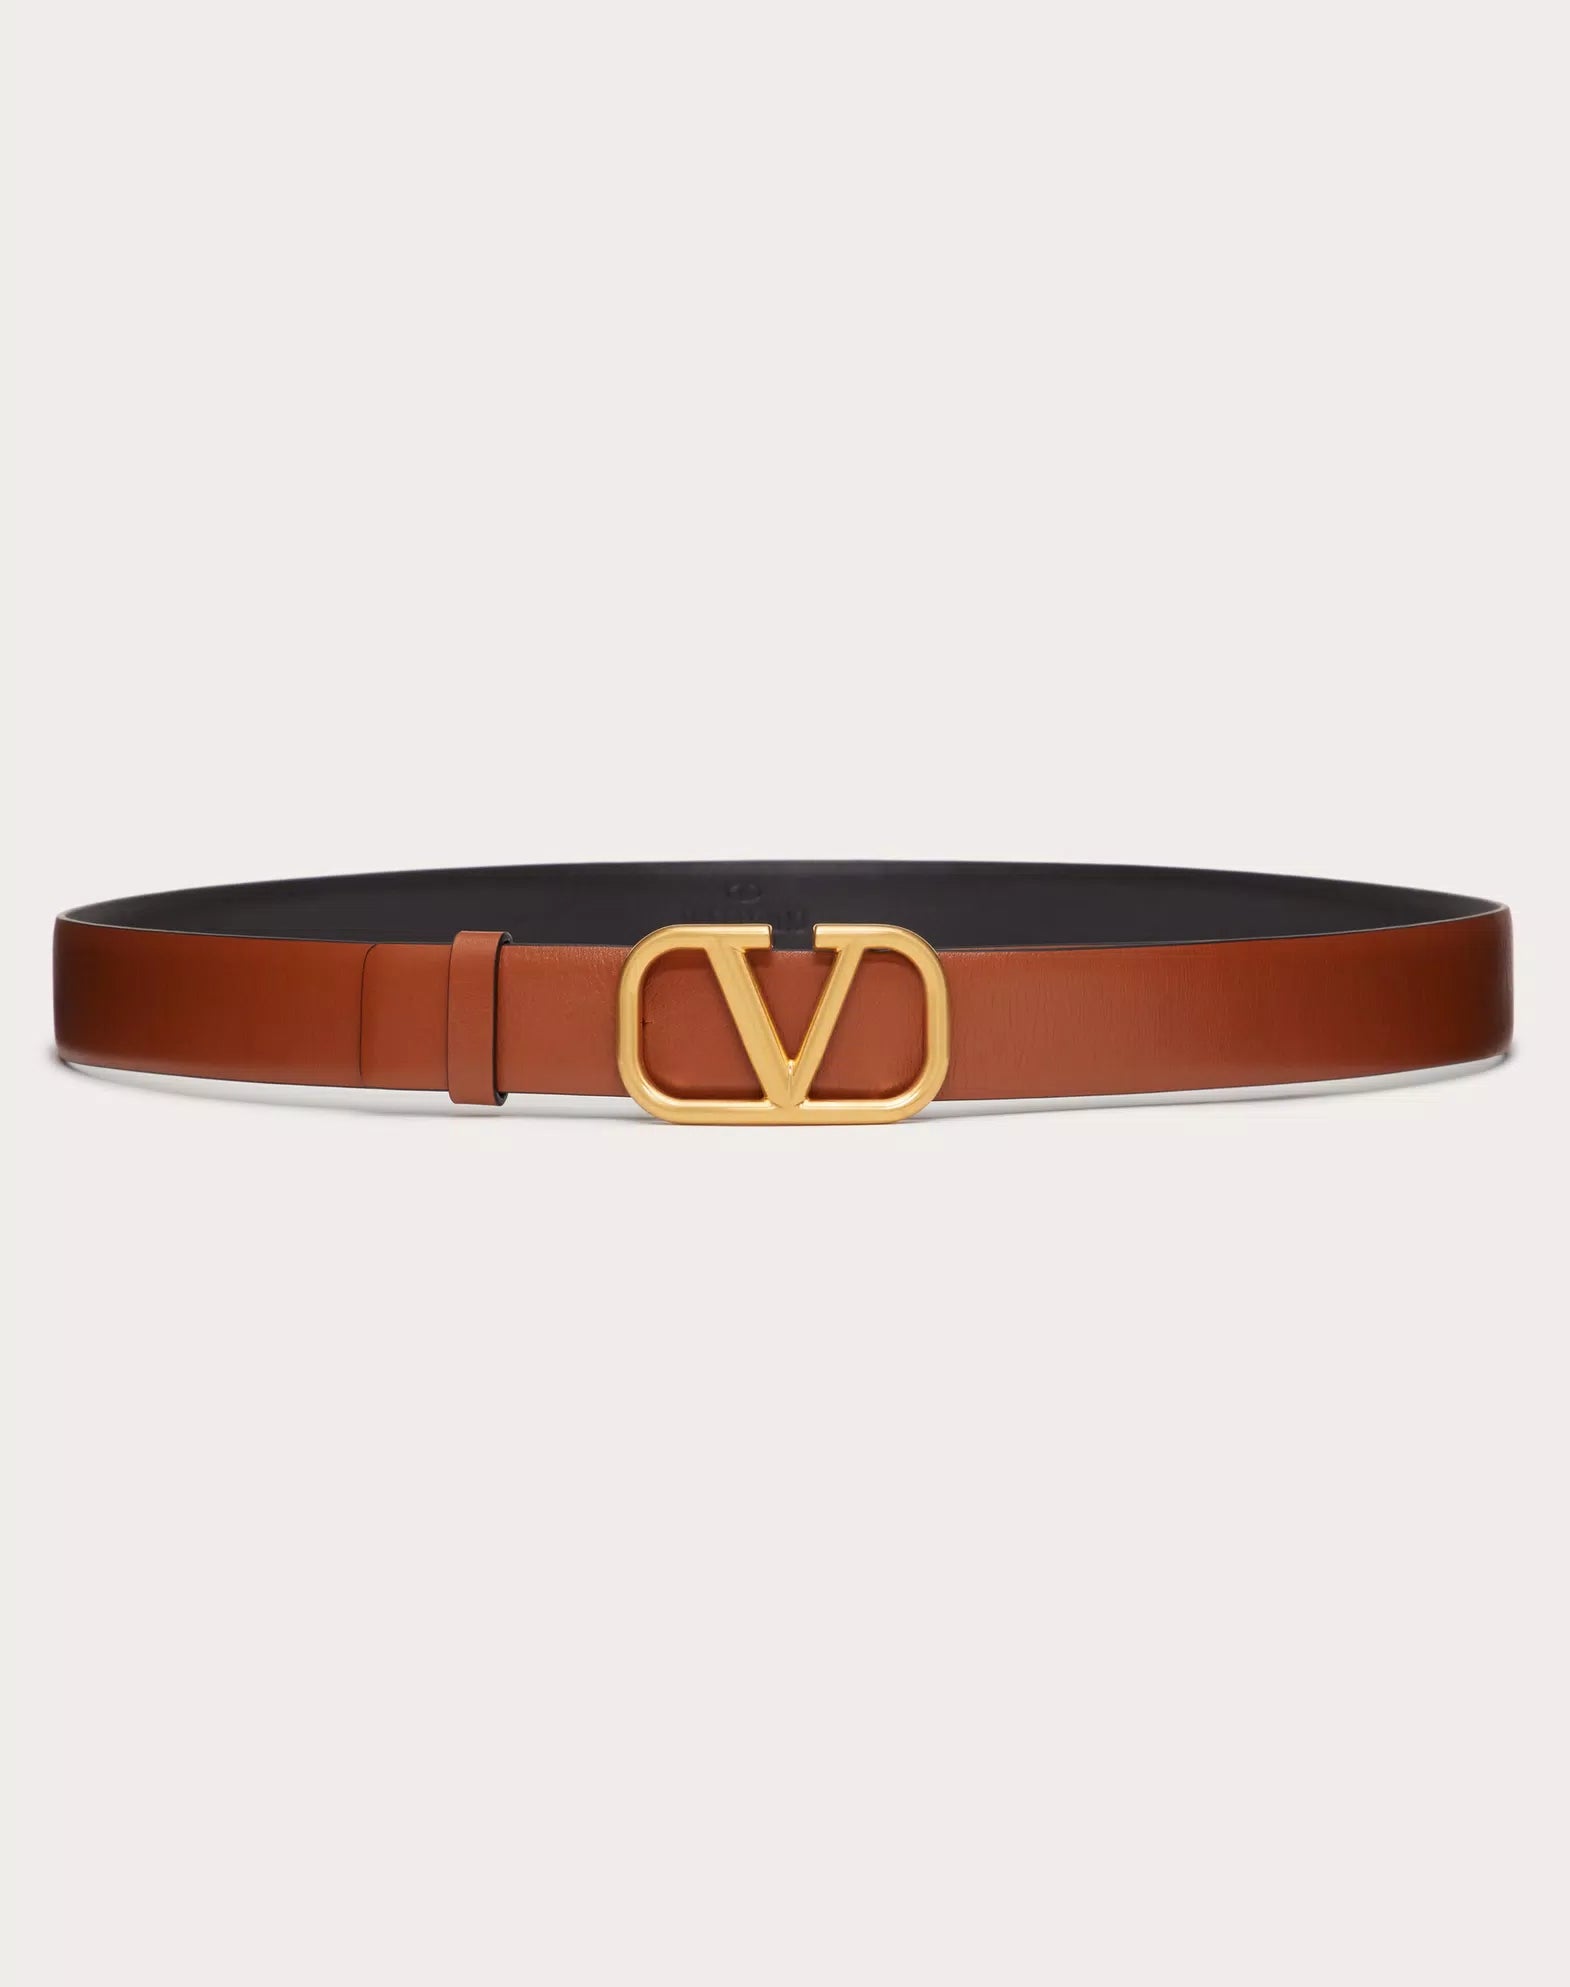 GUCCI GG MARMONT LEATHER BELT WITH SHINY BUCKLE – TheLuxeLend